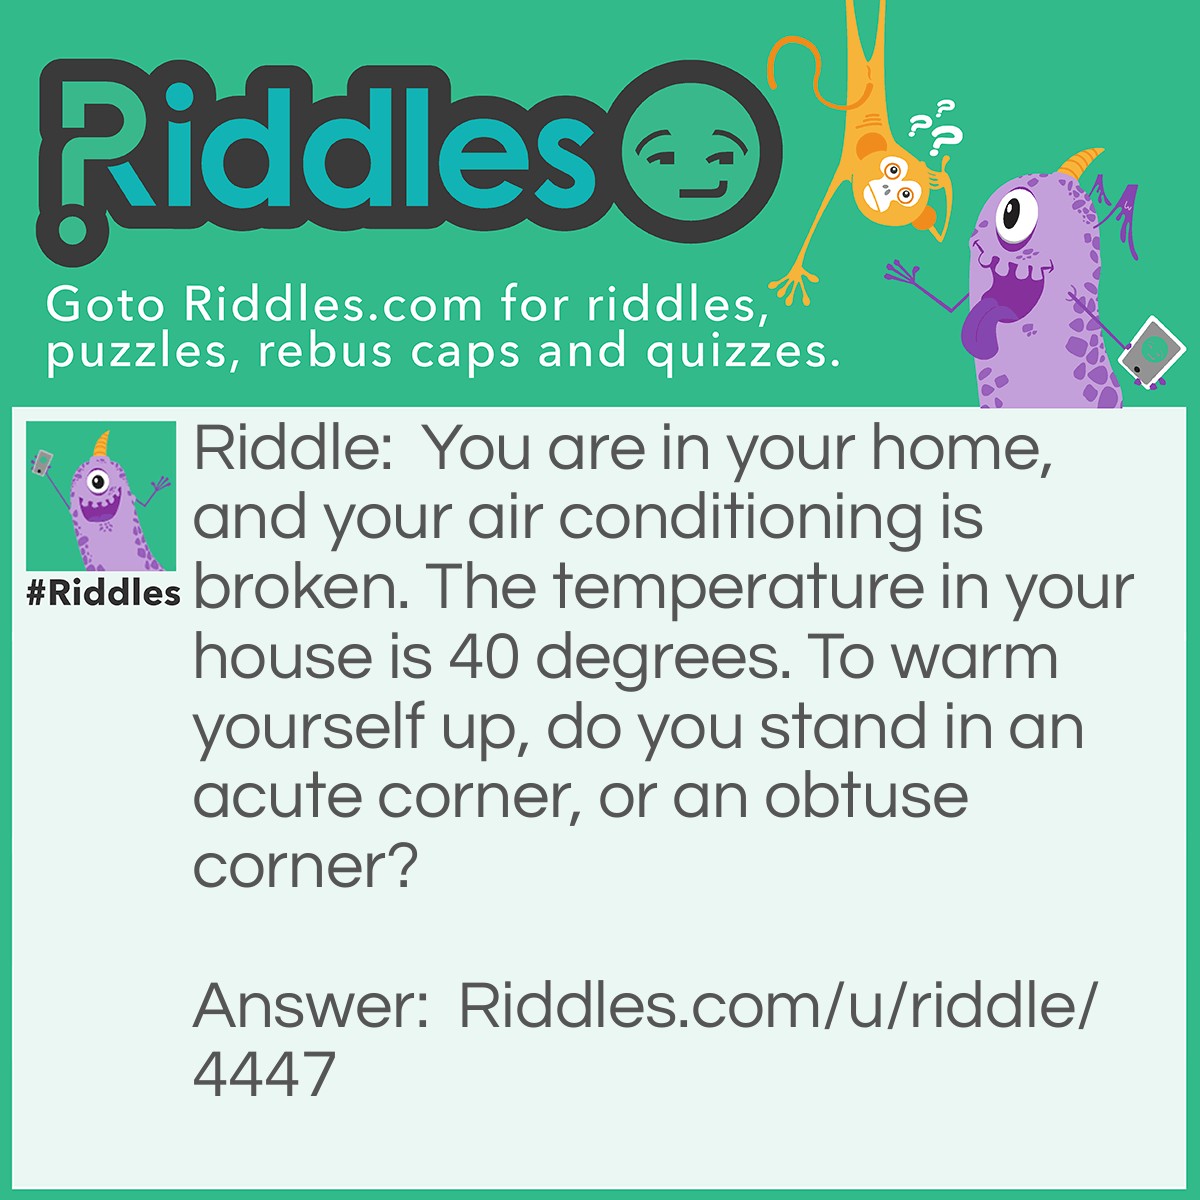 Riddle: You are in your home, and your air conditioning is broken. The temperature in your house is 40 degrees. To warm yourself up, do you stand in an acute corner, or an obtuse corner? Answer: An obtuse angle because it will be at least 91 degrees.